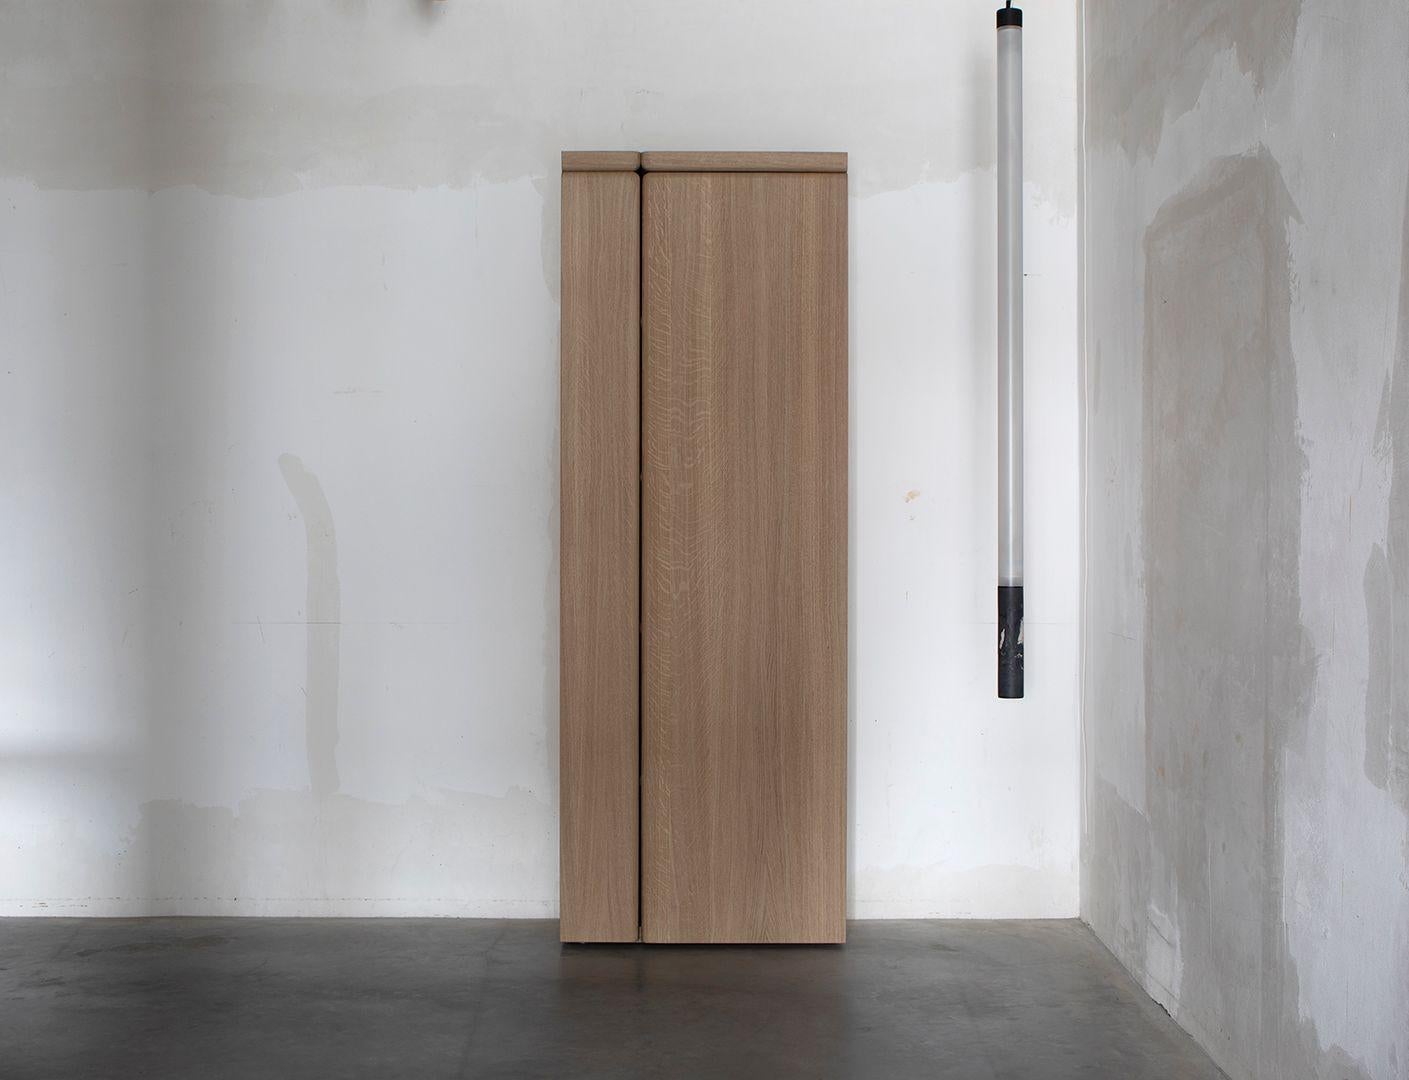 Kast 002 cabinet by Van Rossum
Dimensions: D90 x W40 x H253 cm
Materials: Oak.

The wood is available in all standard Van Rossum colors, or in a matching finish to customer’s own sample.

Tall, sleek storage cabinet in solid Van Rossum oak,